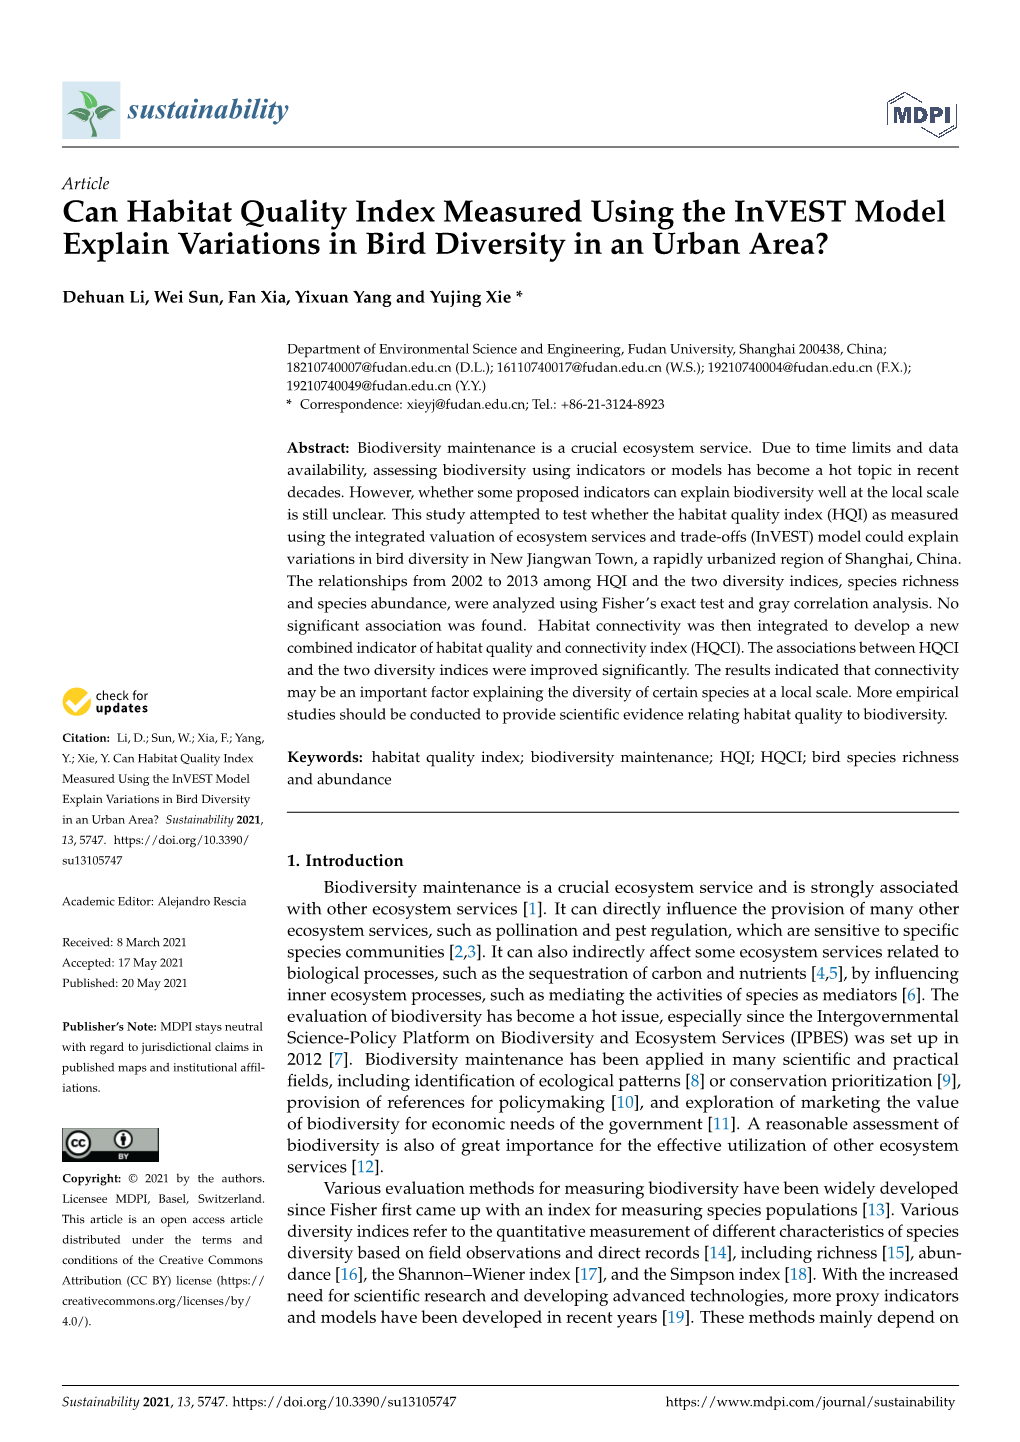 Can Habitat Quality Index Measured Using the Invest Model Explain Variations in Bird Diversity in an Urban Area?